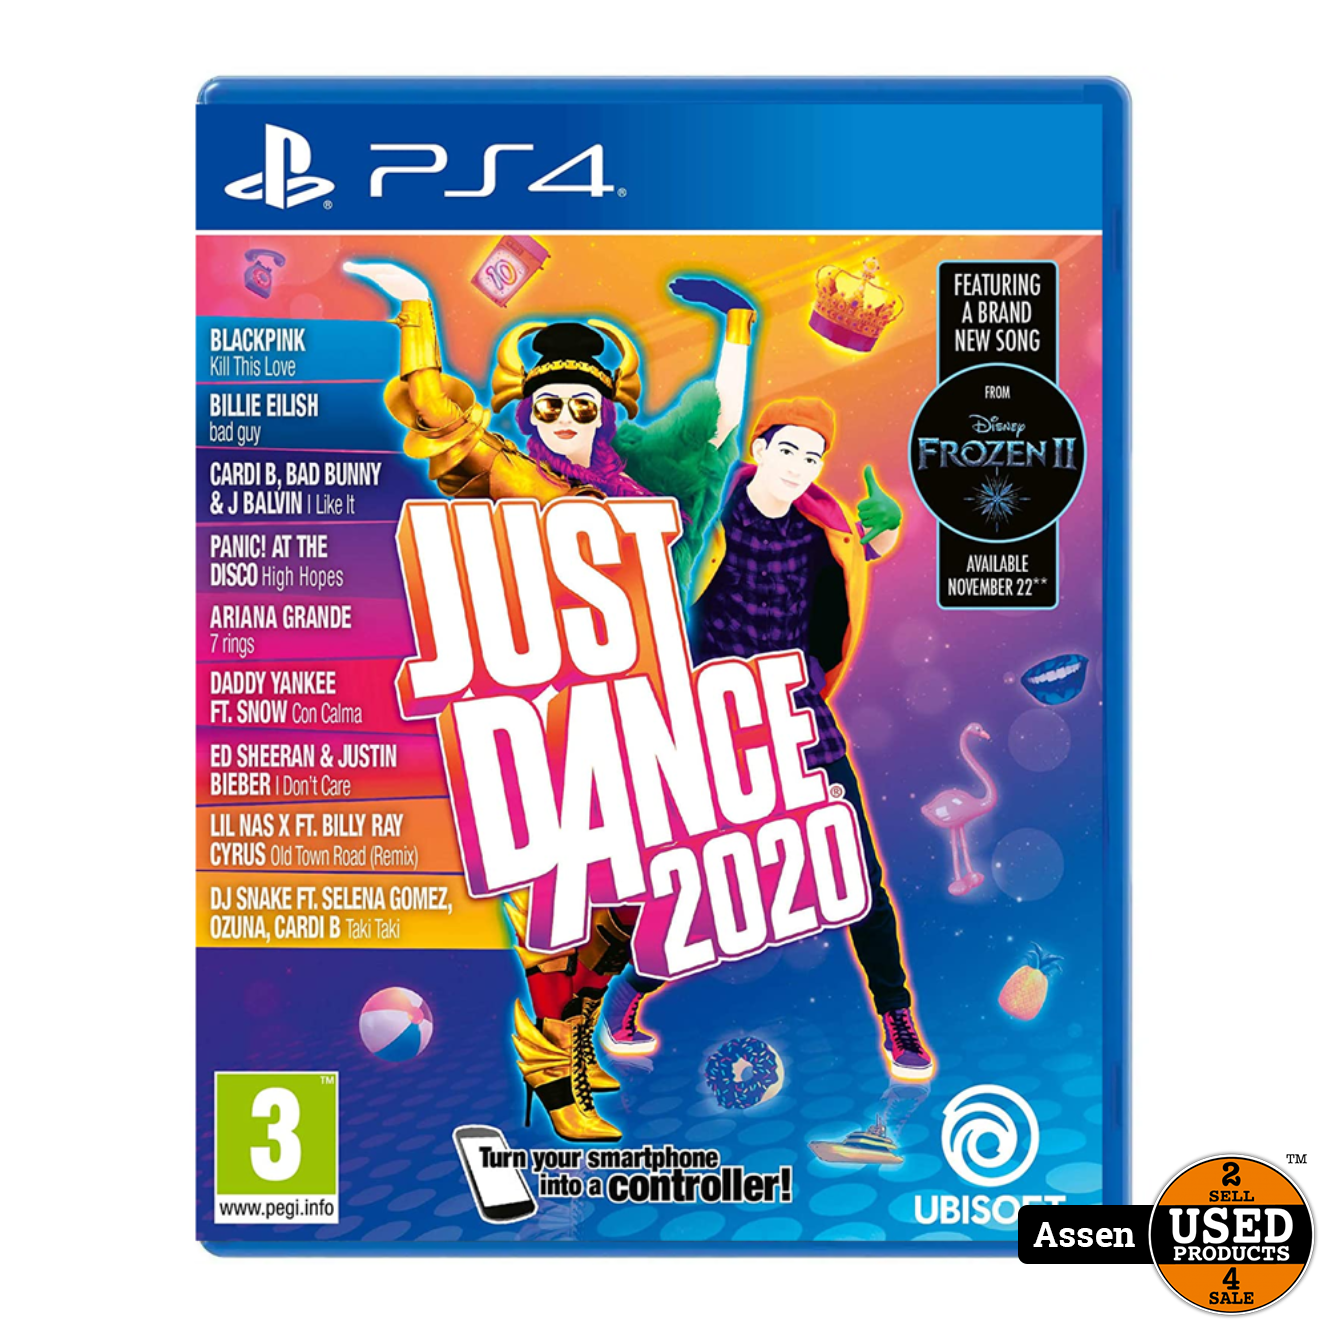 wenkbrauw gespannen insect Playstation 4 game Just Dance 2020 - Used Products Assen